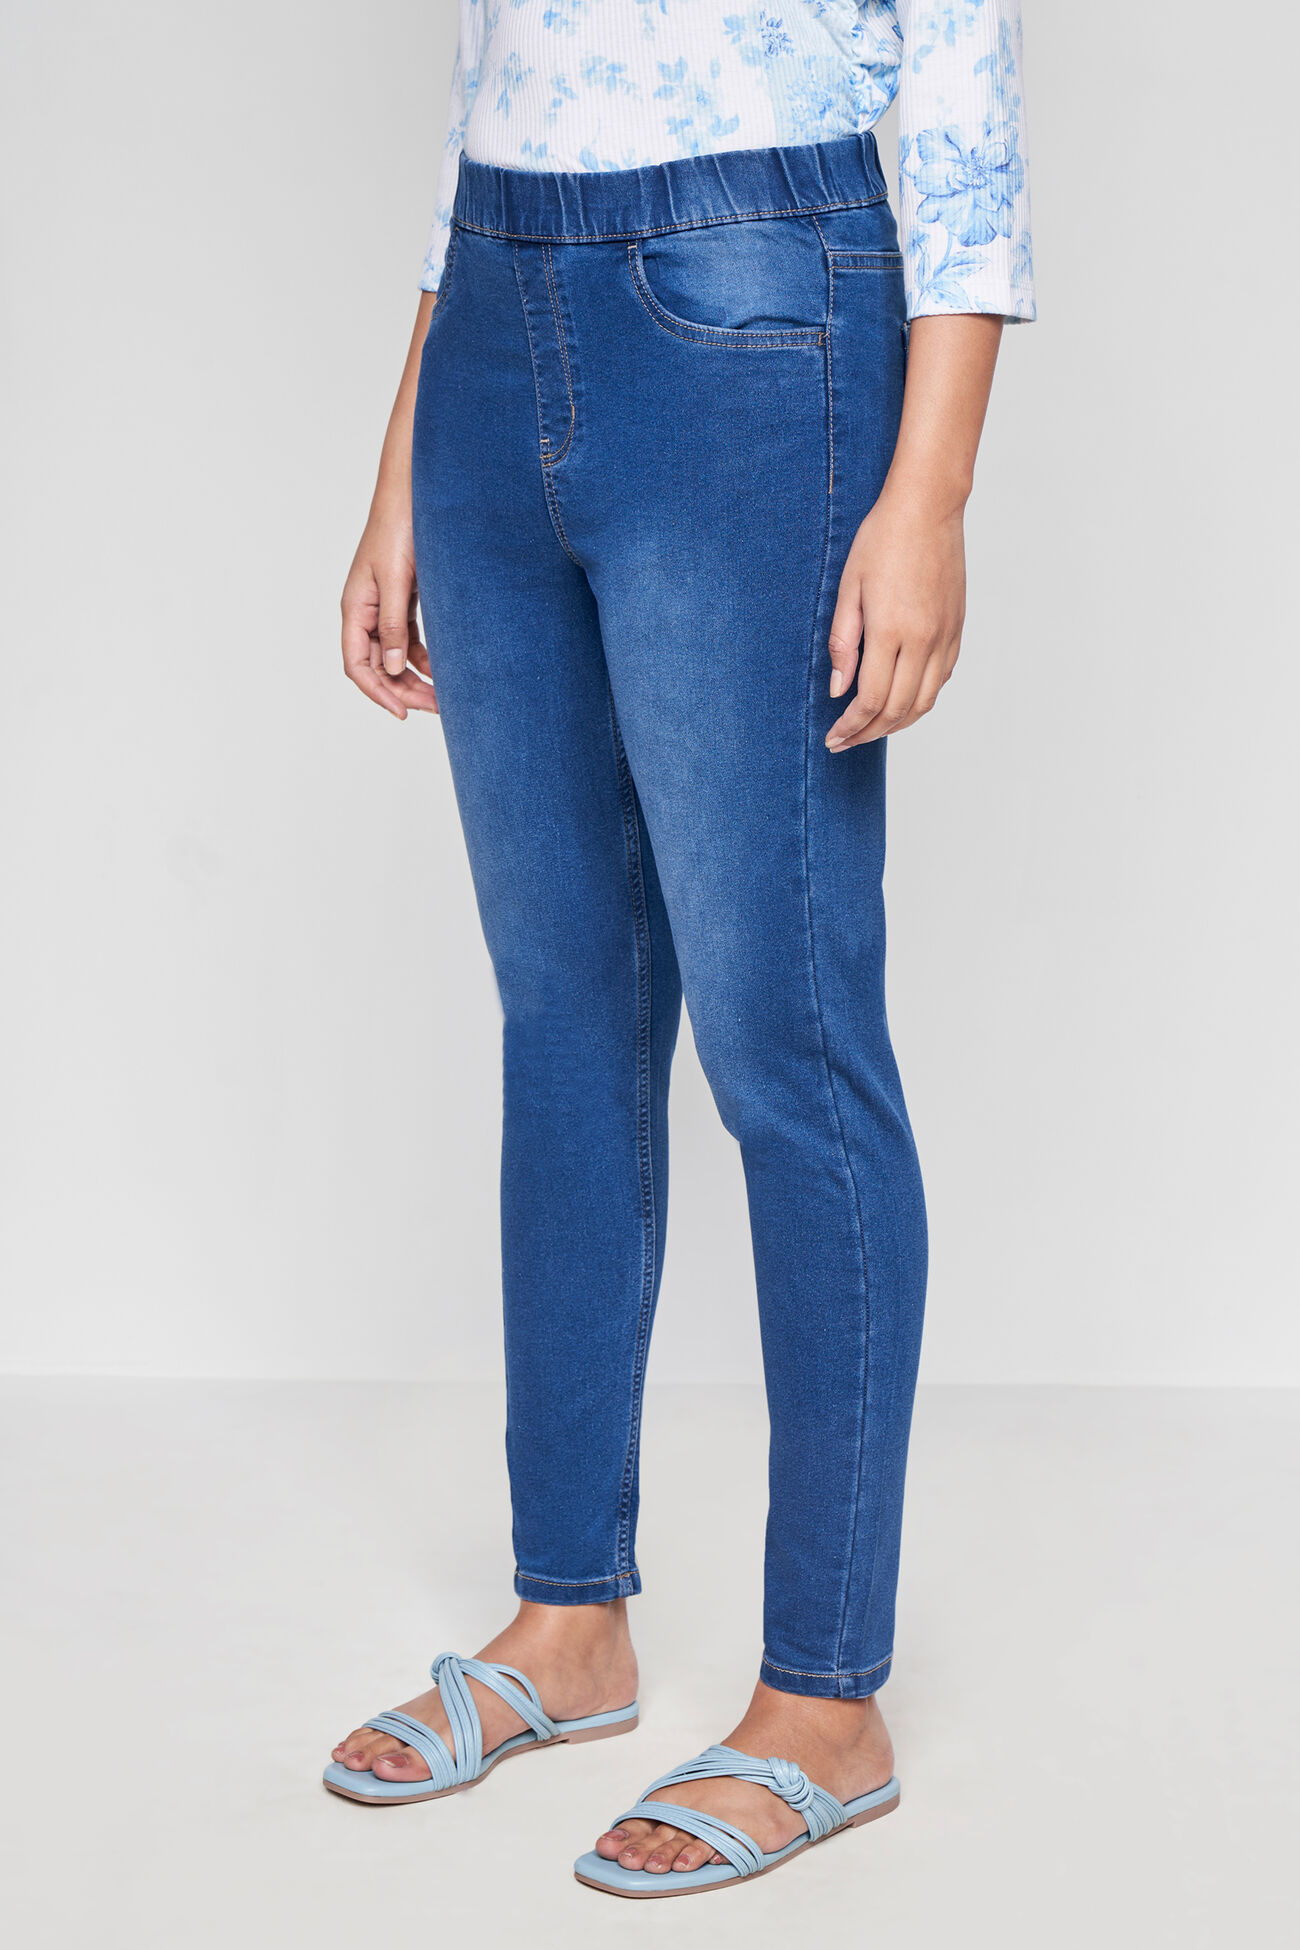 Buy our Medium Blue Solid Straight Bottom online from ANDIndia SC